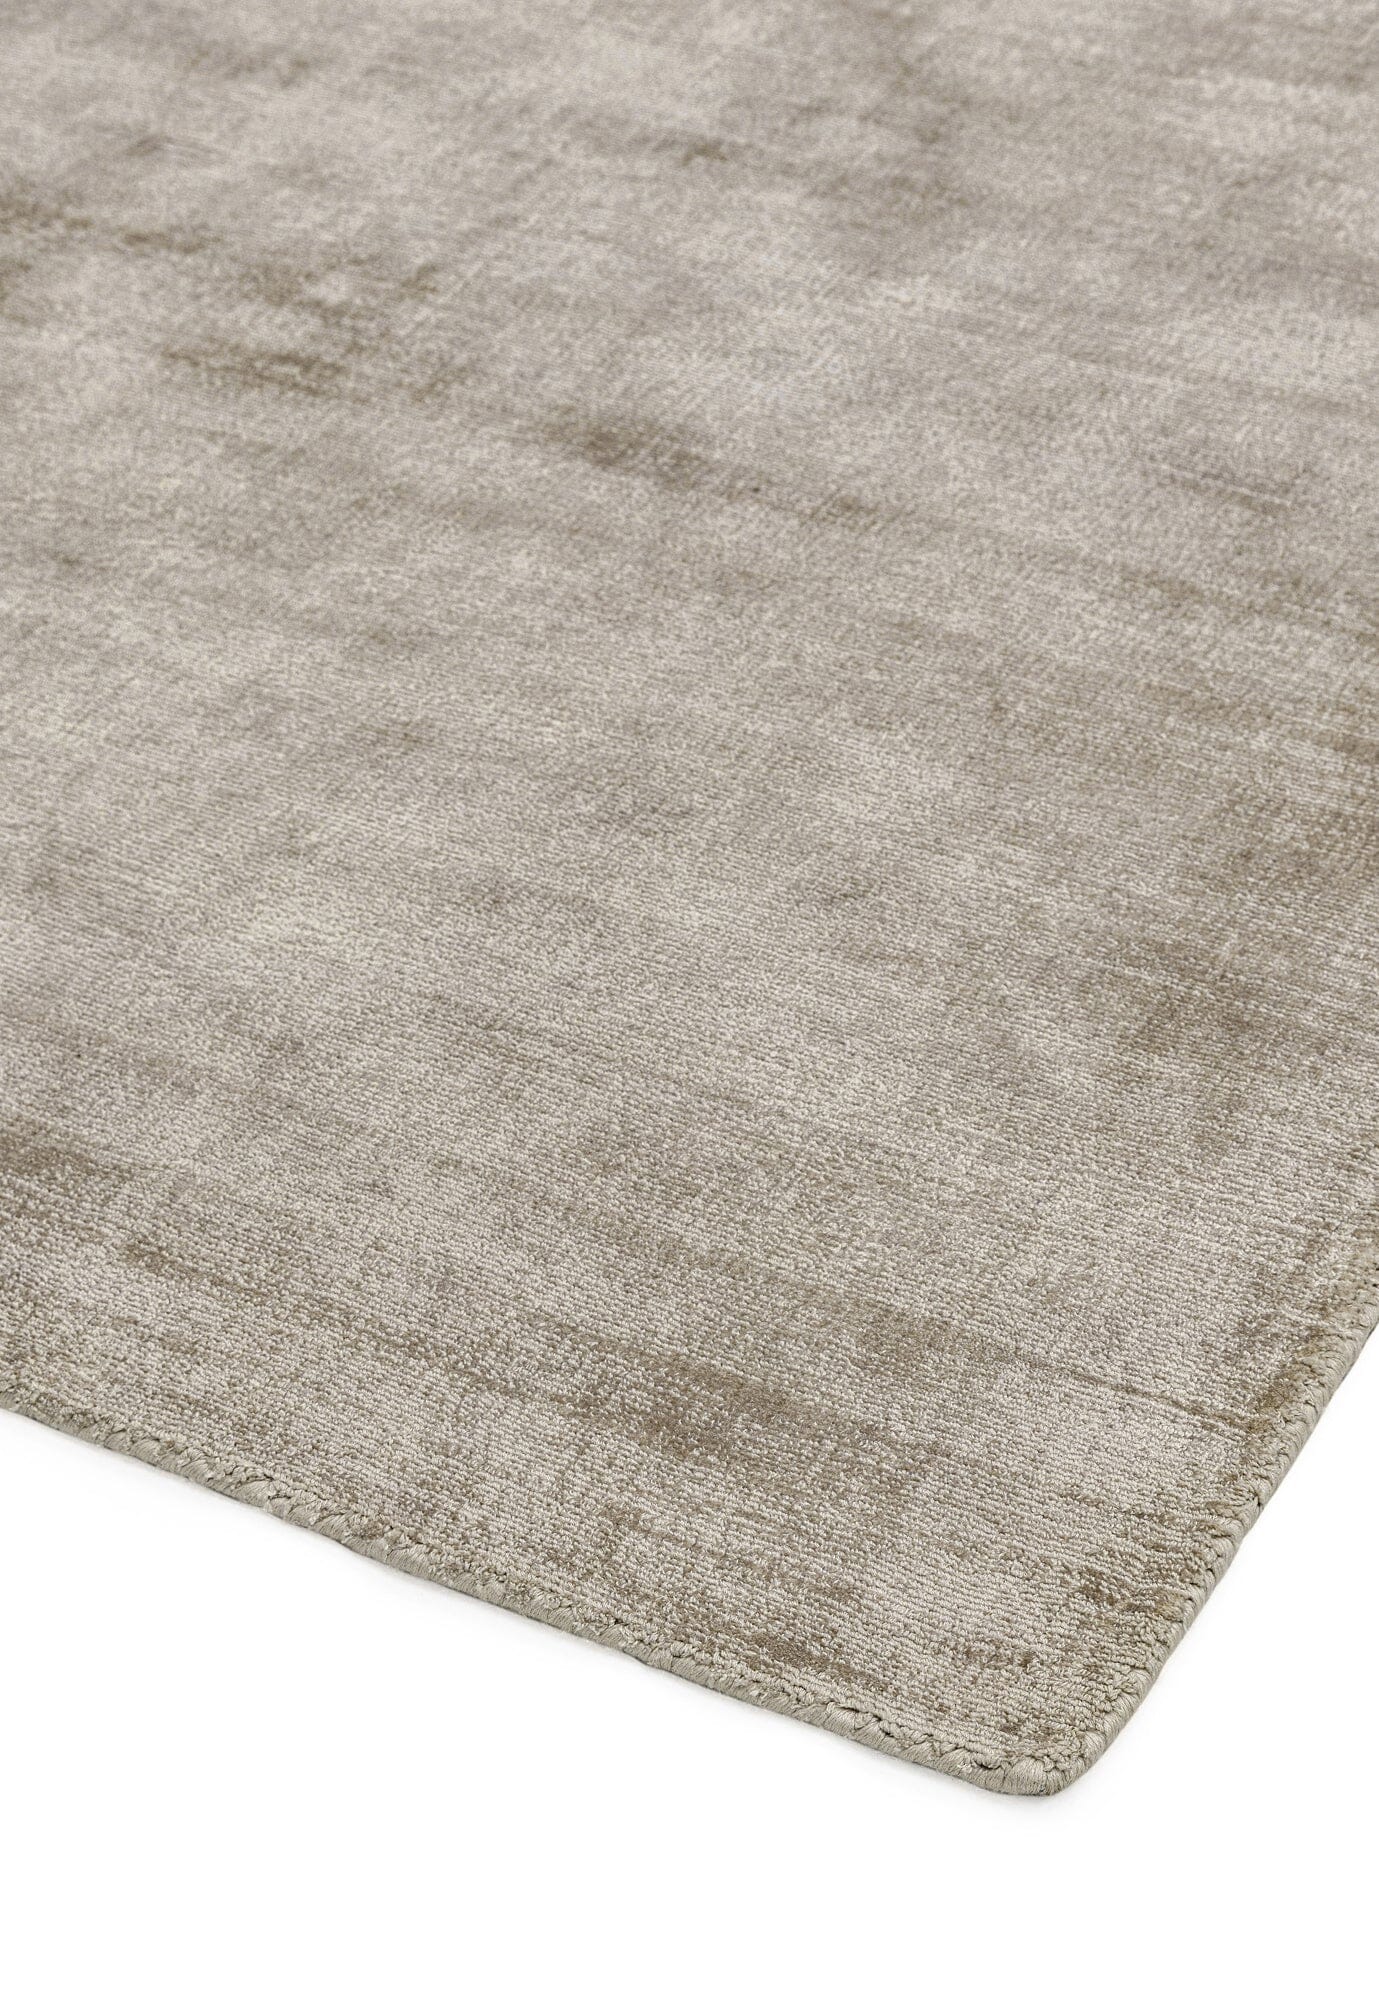  Asiatic Carpets-Asiatic Carpets Blade Hand Woven Rug Smoke - 120 x 170cm-Grey, Silver 197 